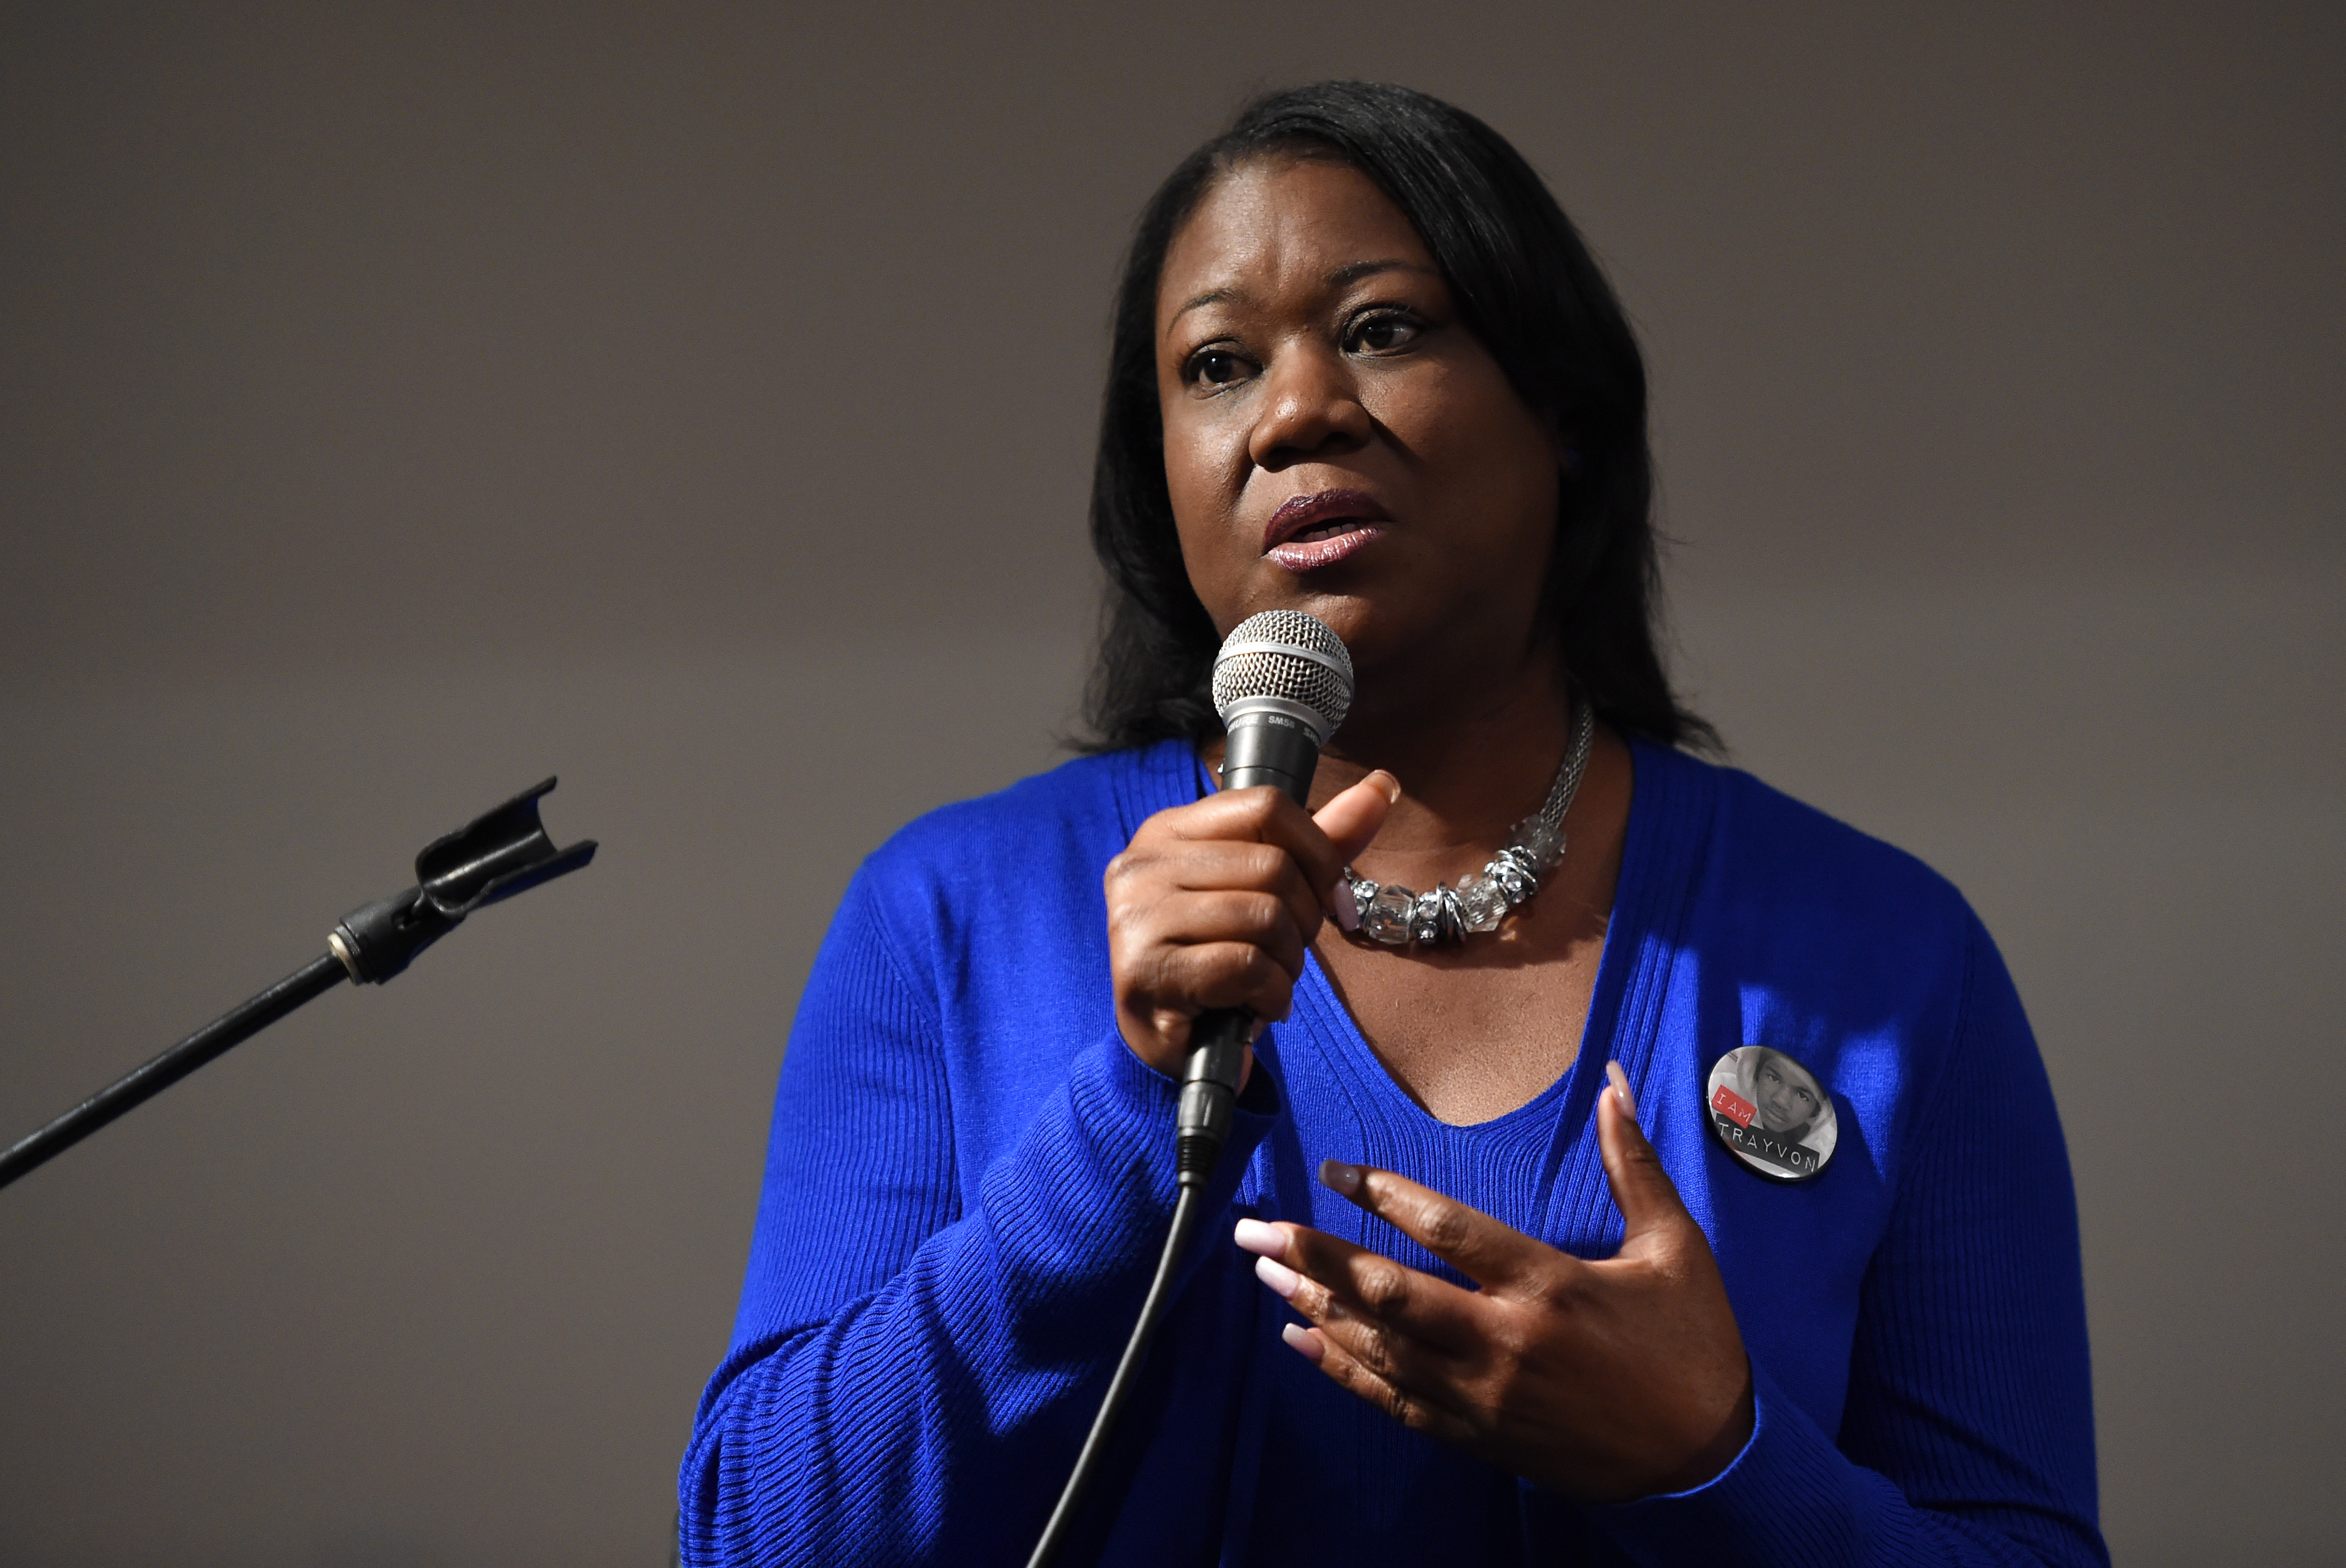 A Conversation With Sybrina Fulton